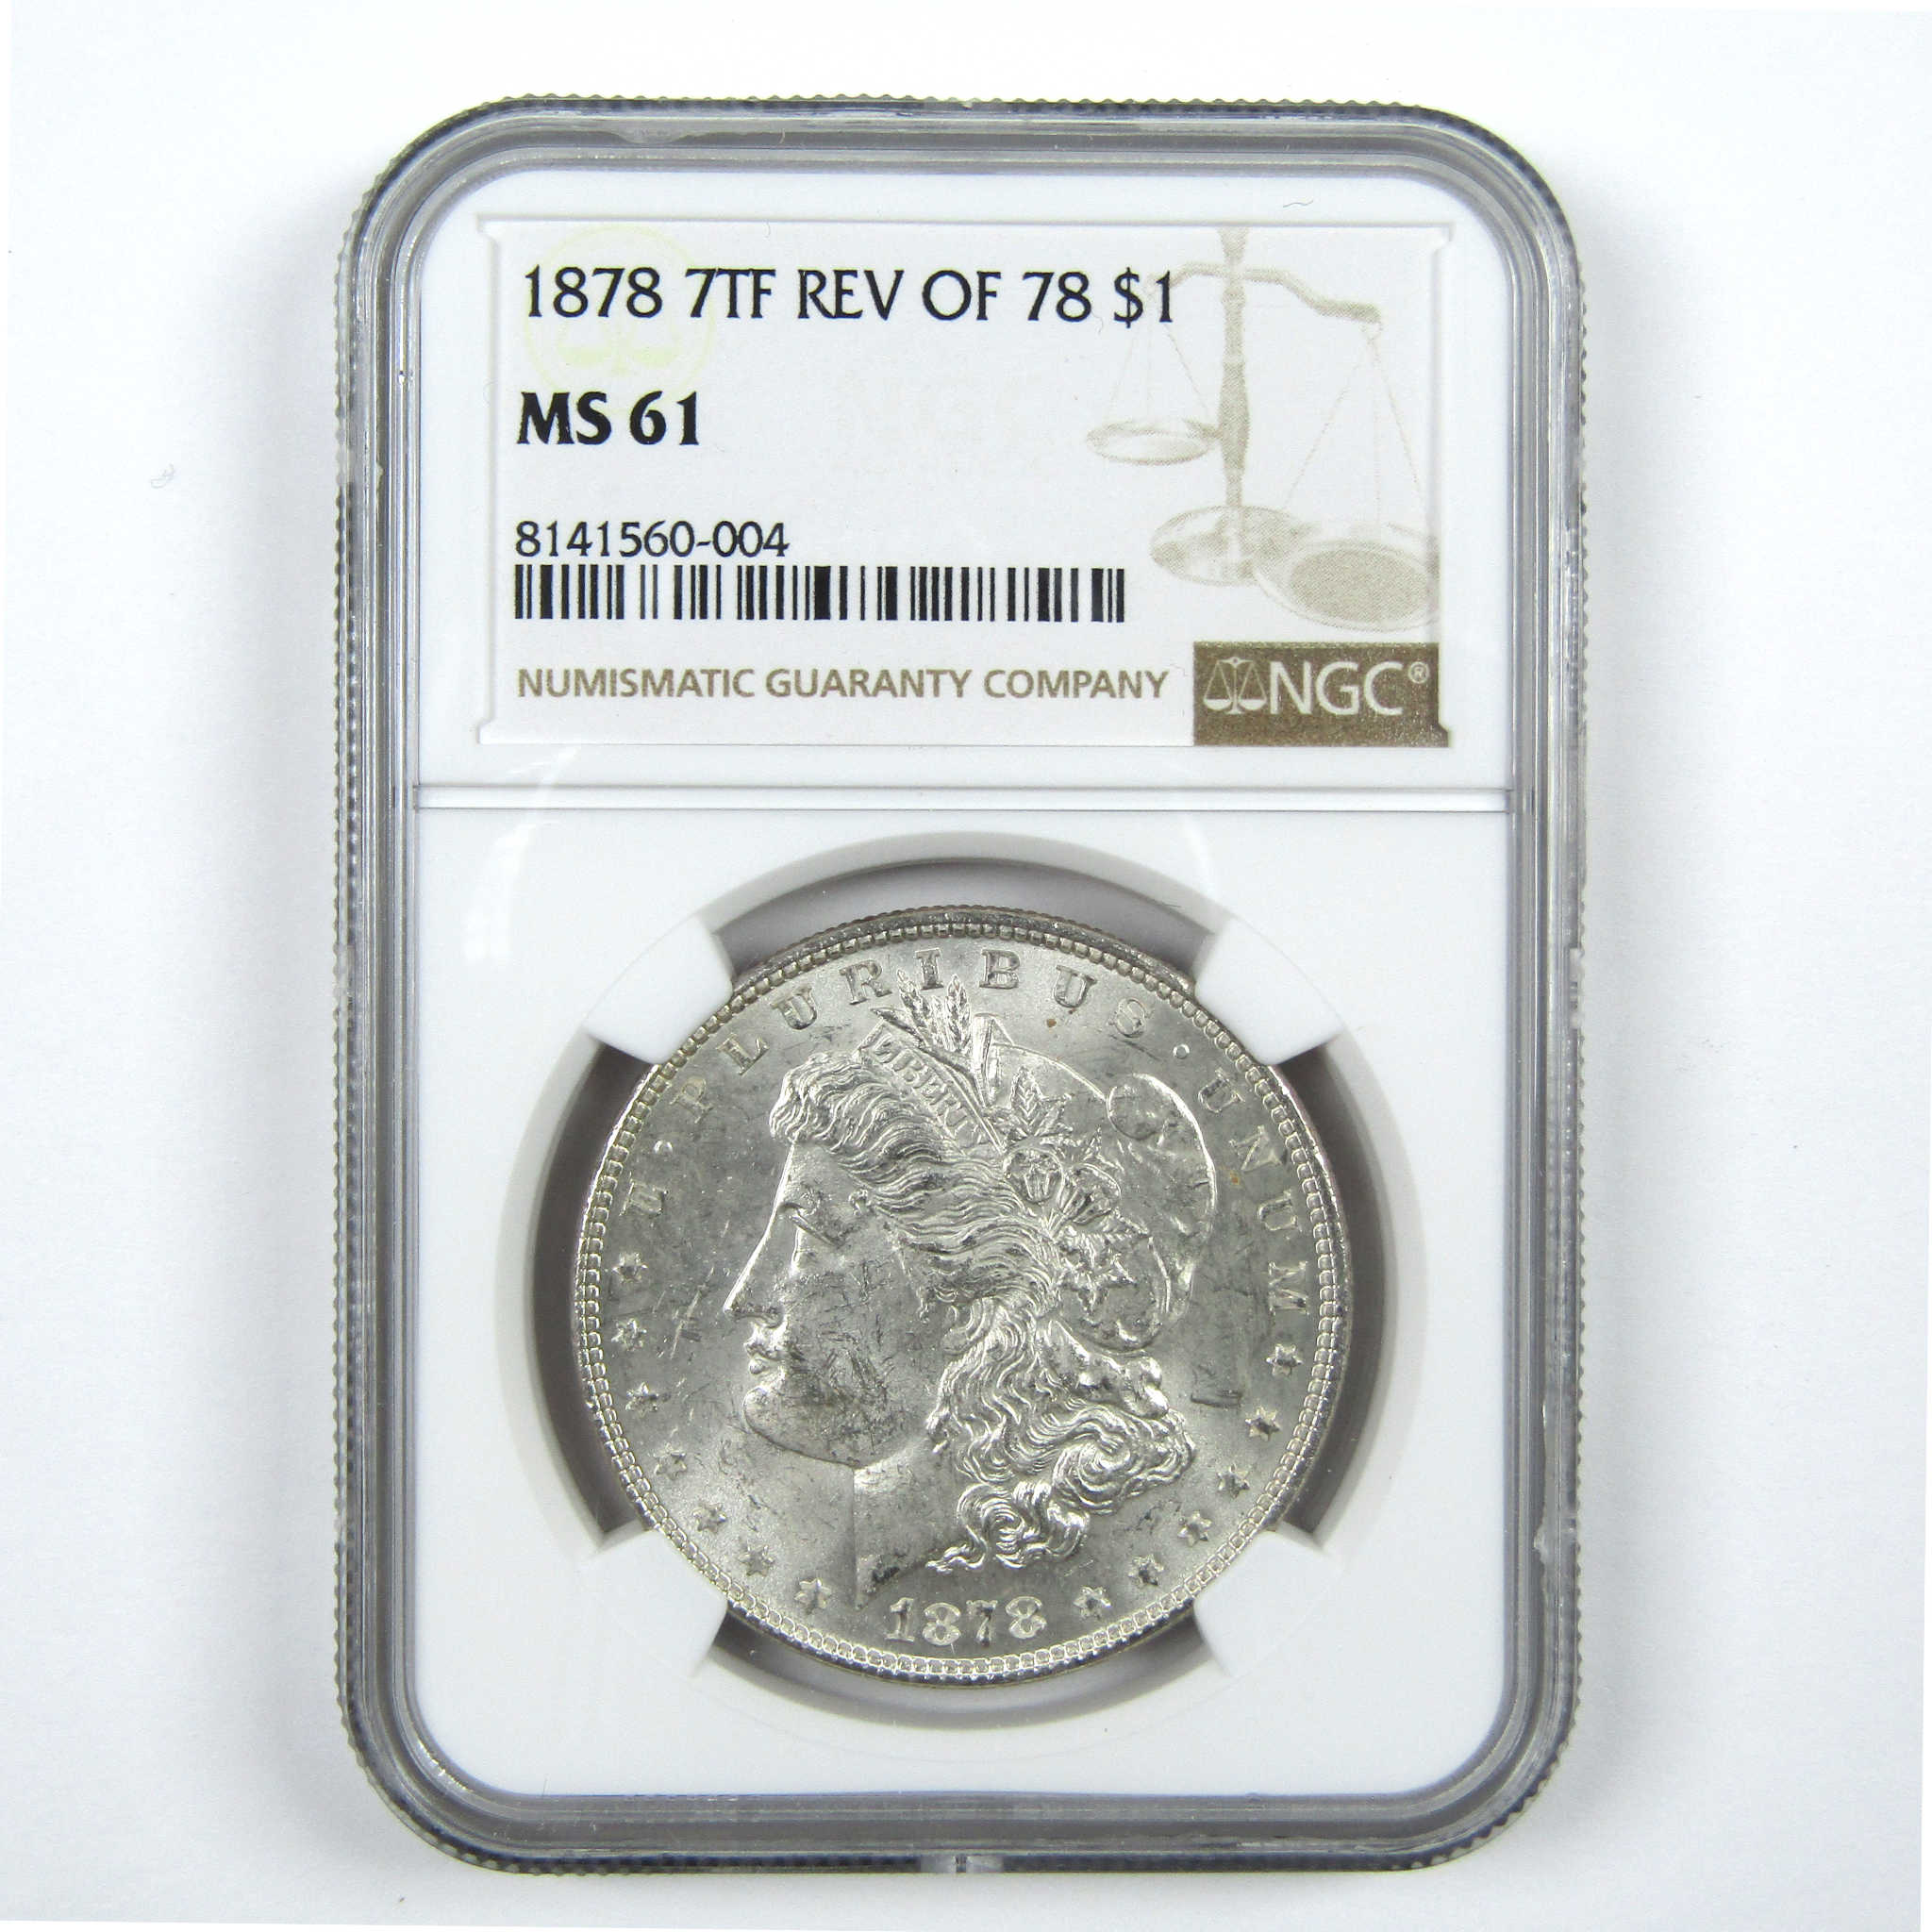 1878 7TF Rev 78 Morgan Dollar MS 61 NGC Uncirculated SKU:I14037 - Morgan coin - Morgan silver dollar - Morgan silver dollar for sale - Profile Coins &amp; Collectibles